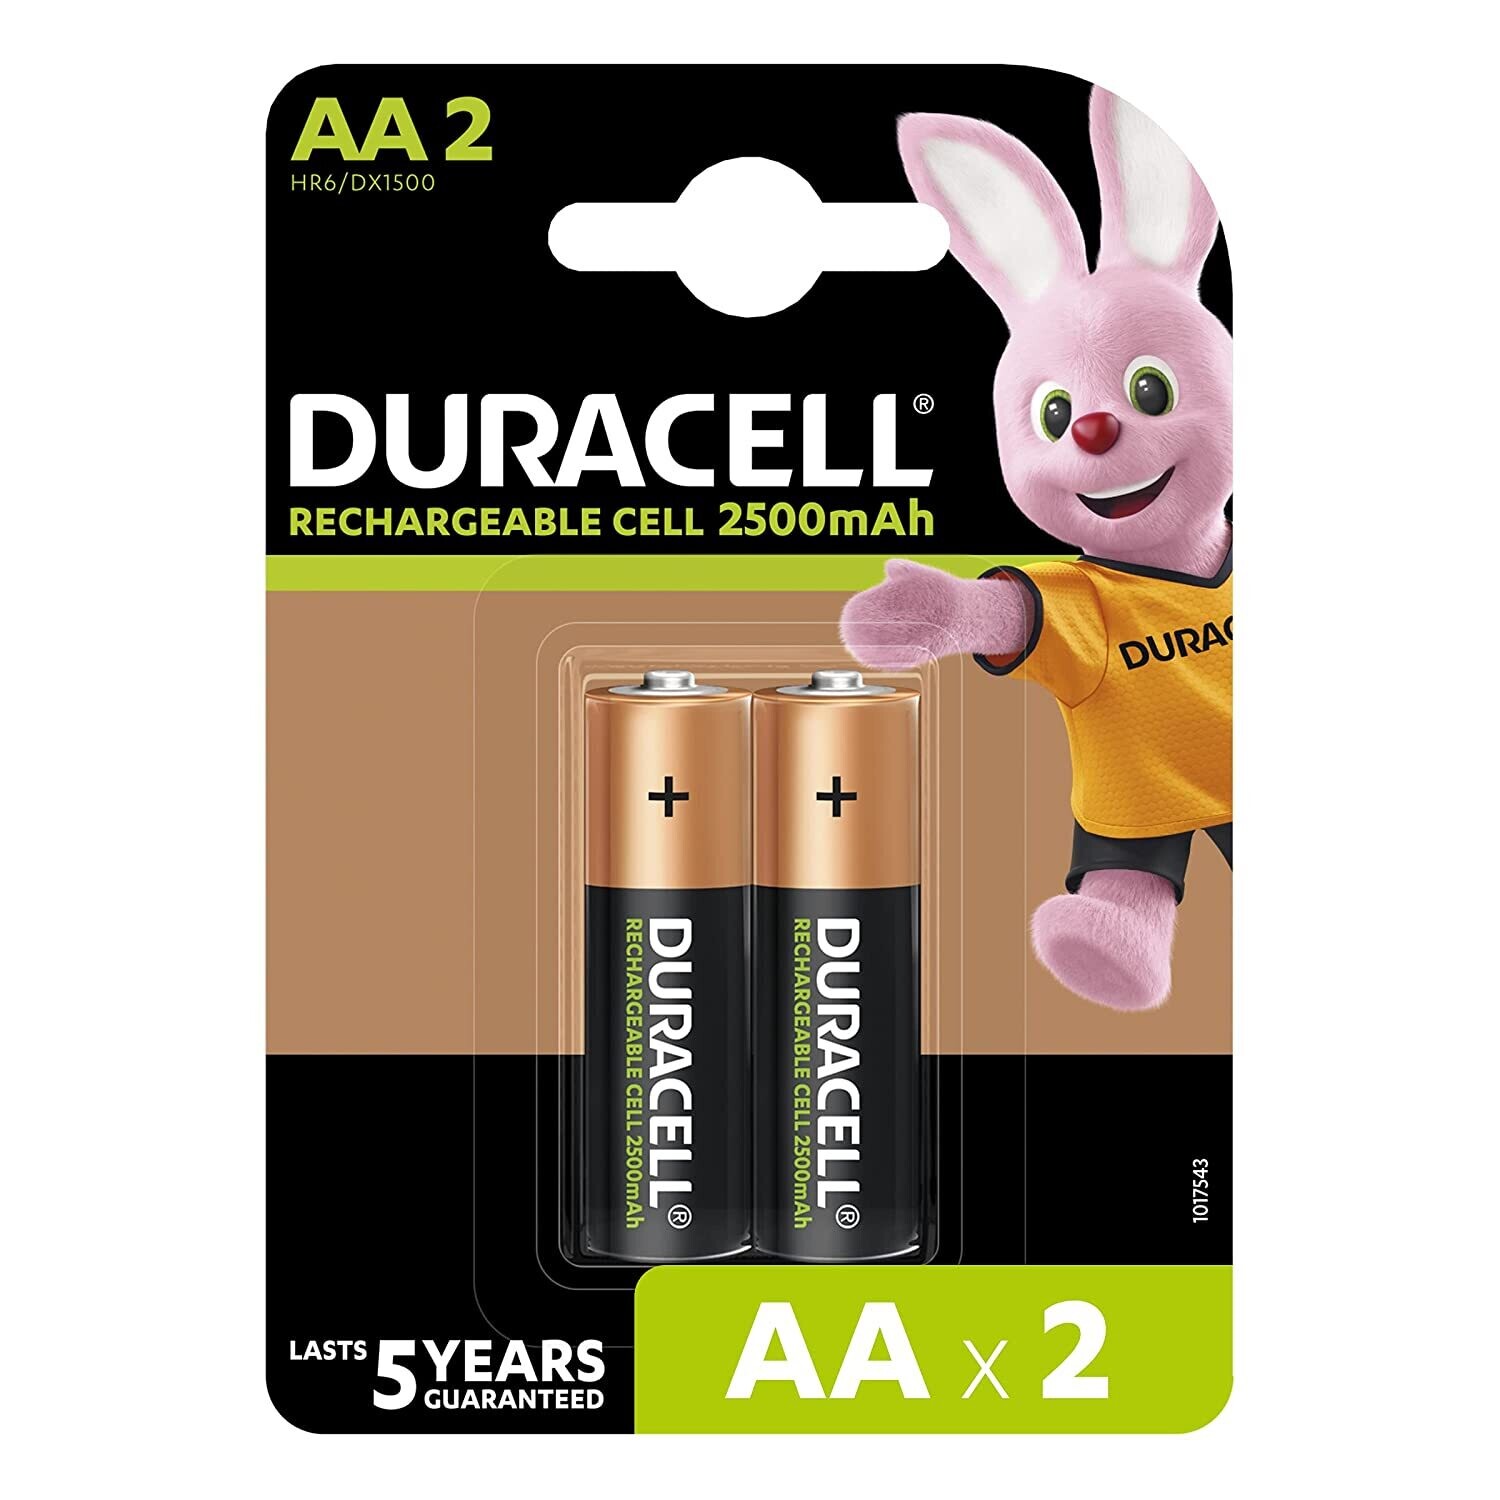 Duracell Rechargeable AA 2500mAh, 2 Batteries